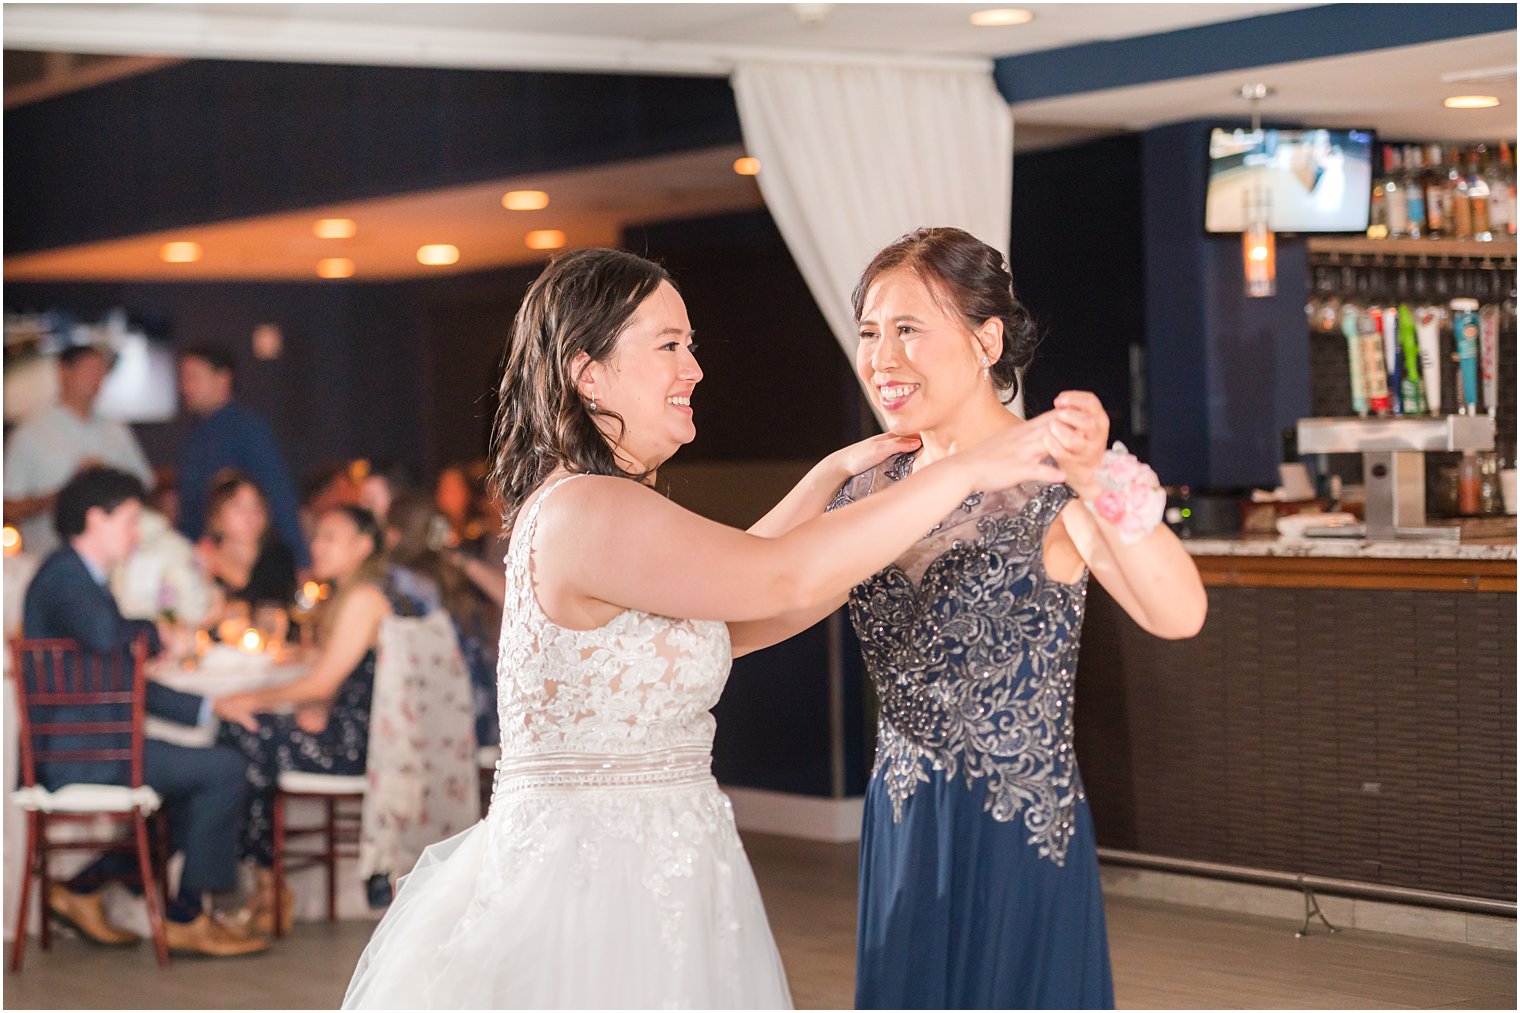 bride dances with mom during reception at Icona Winddrift